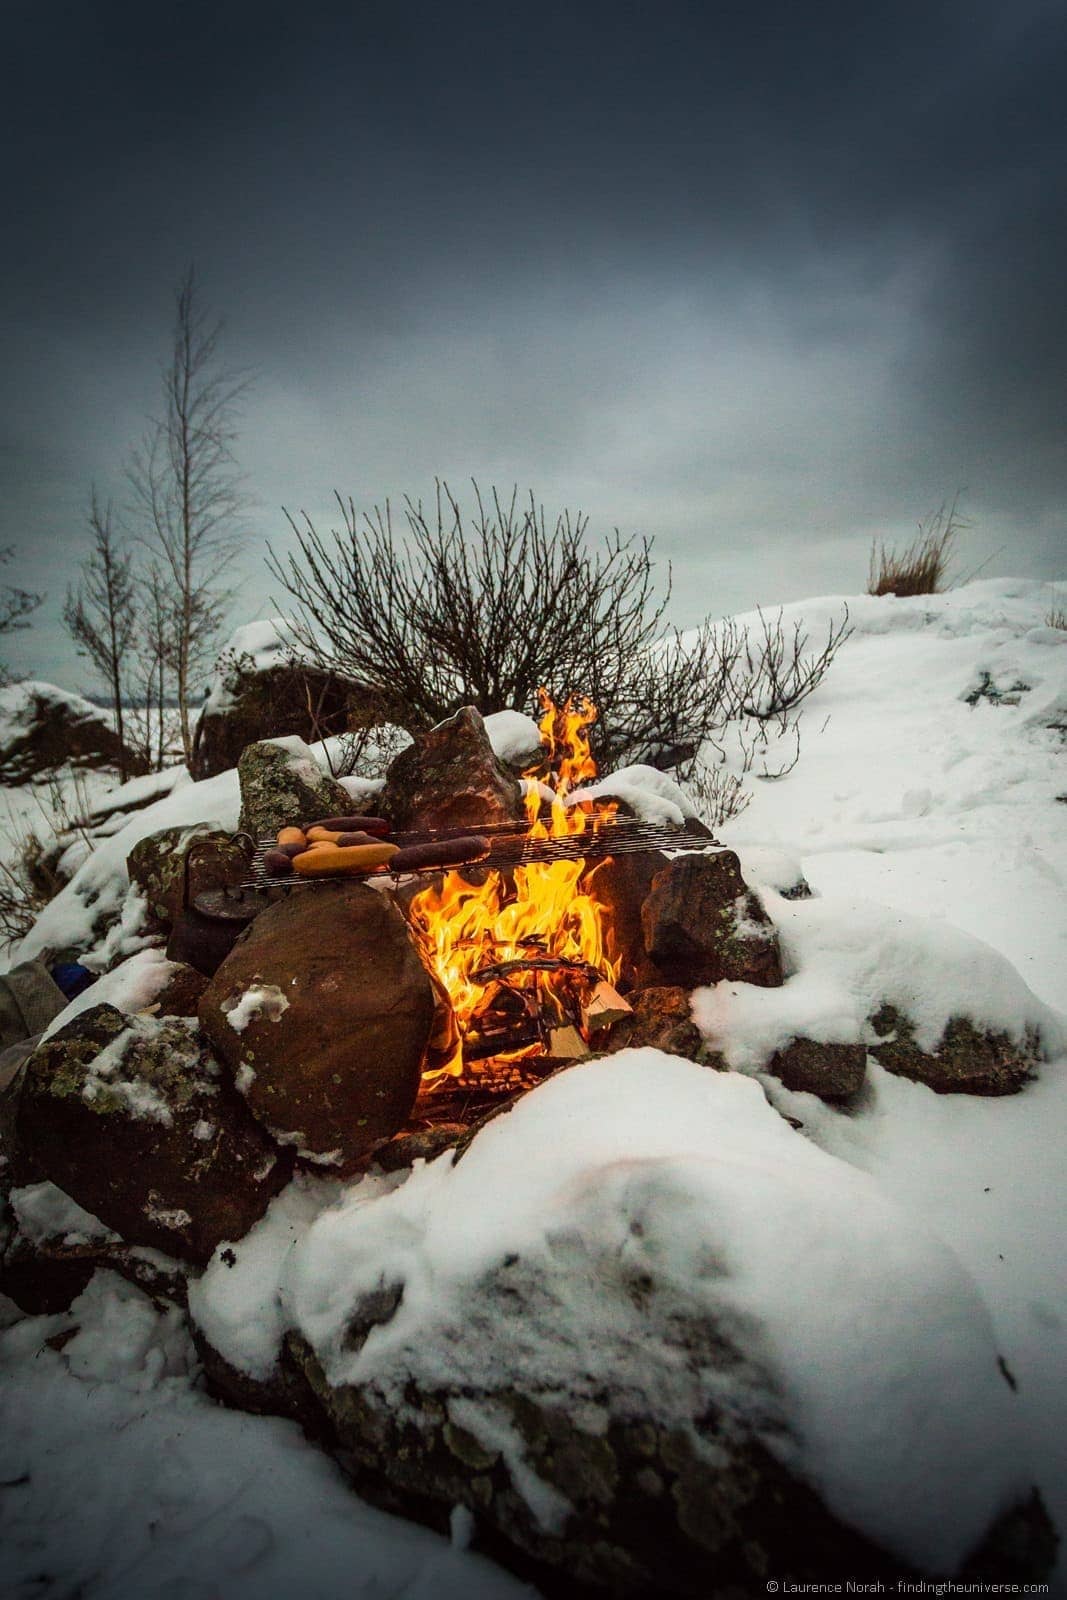 sausages on the fire rauma finland